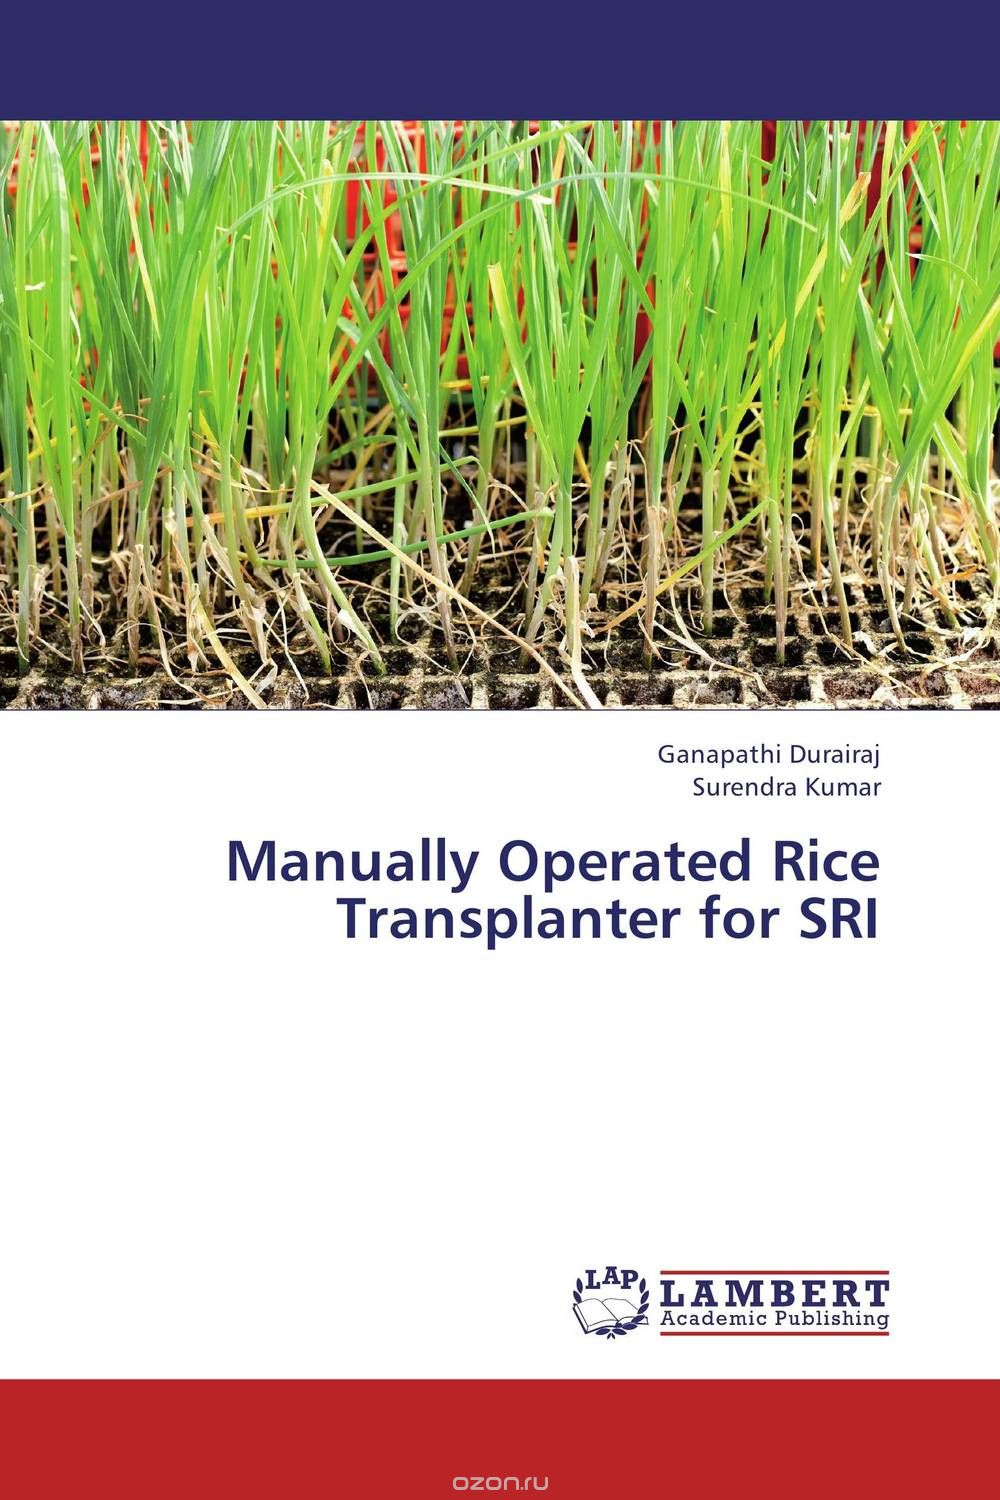 Manually Operated Rice Transplanter for SRI